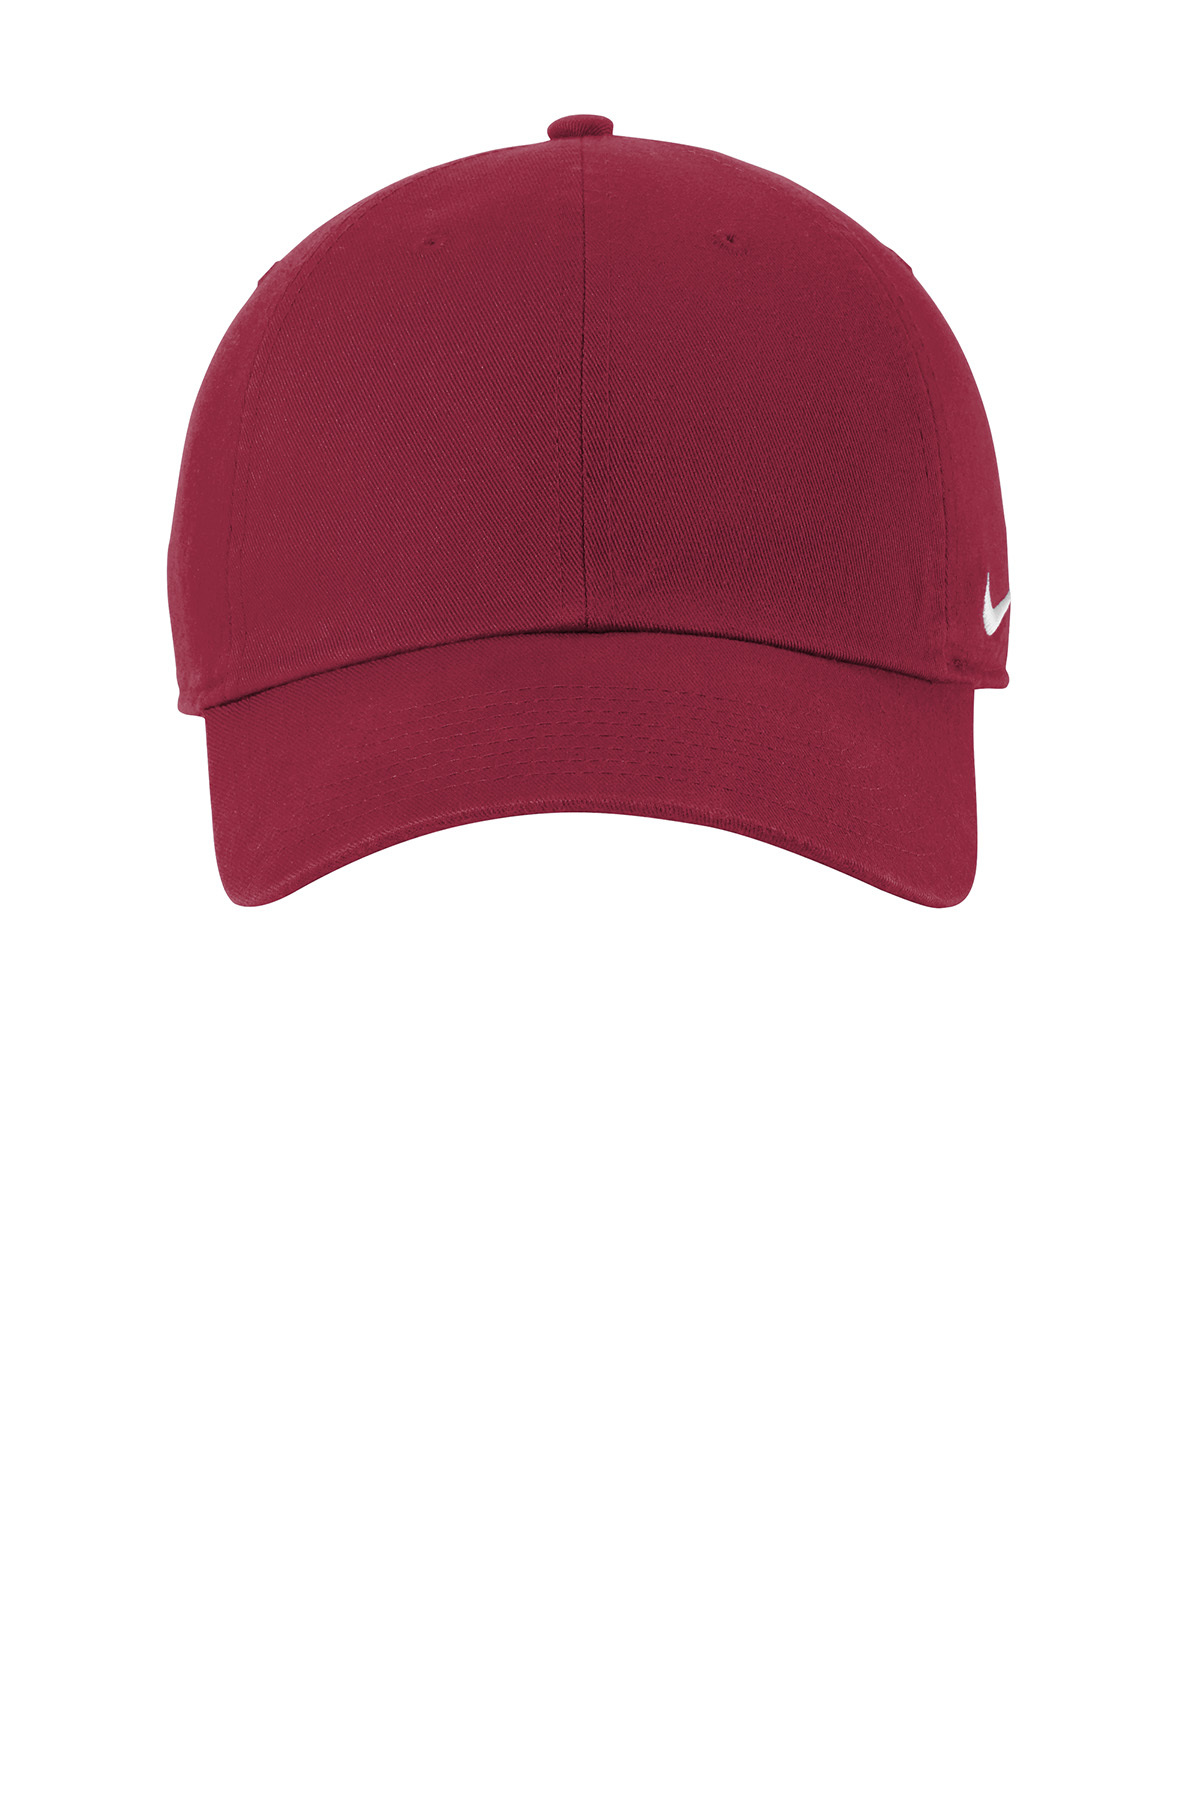 click to view Team Maroon